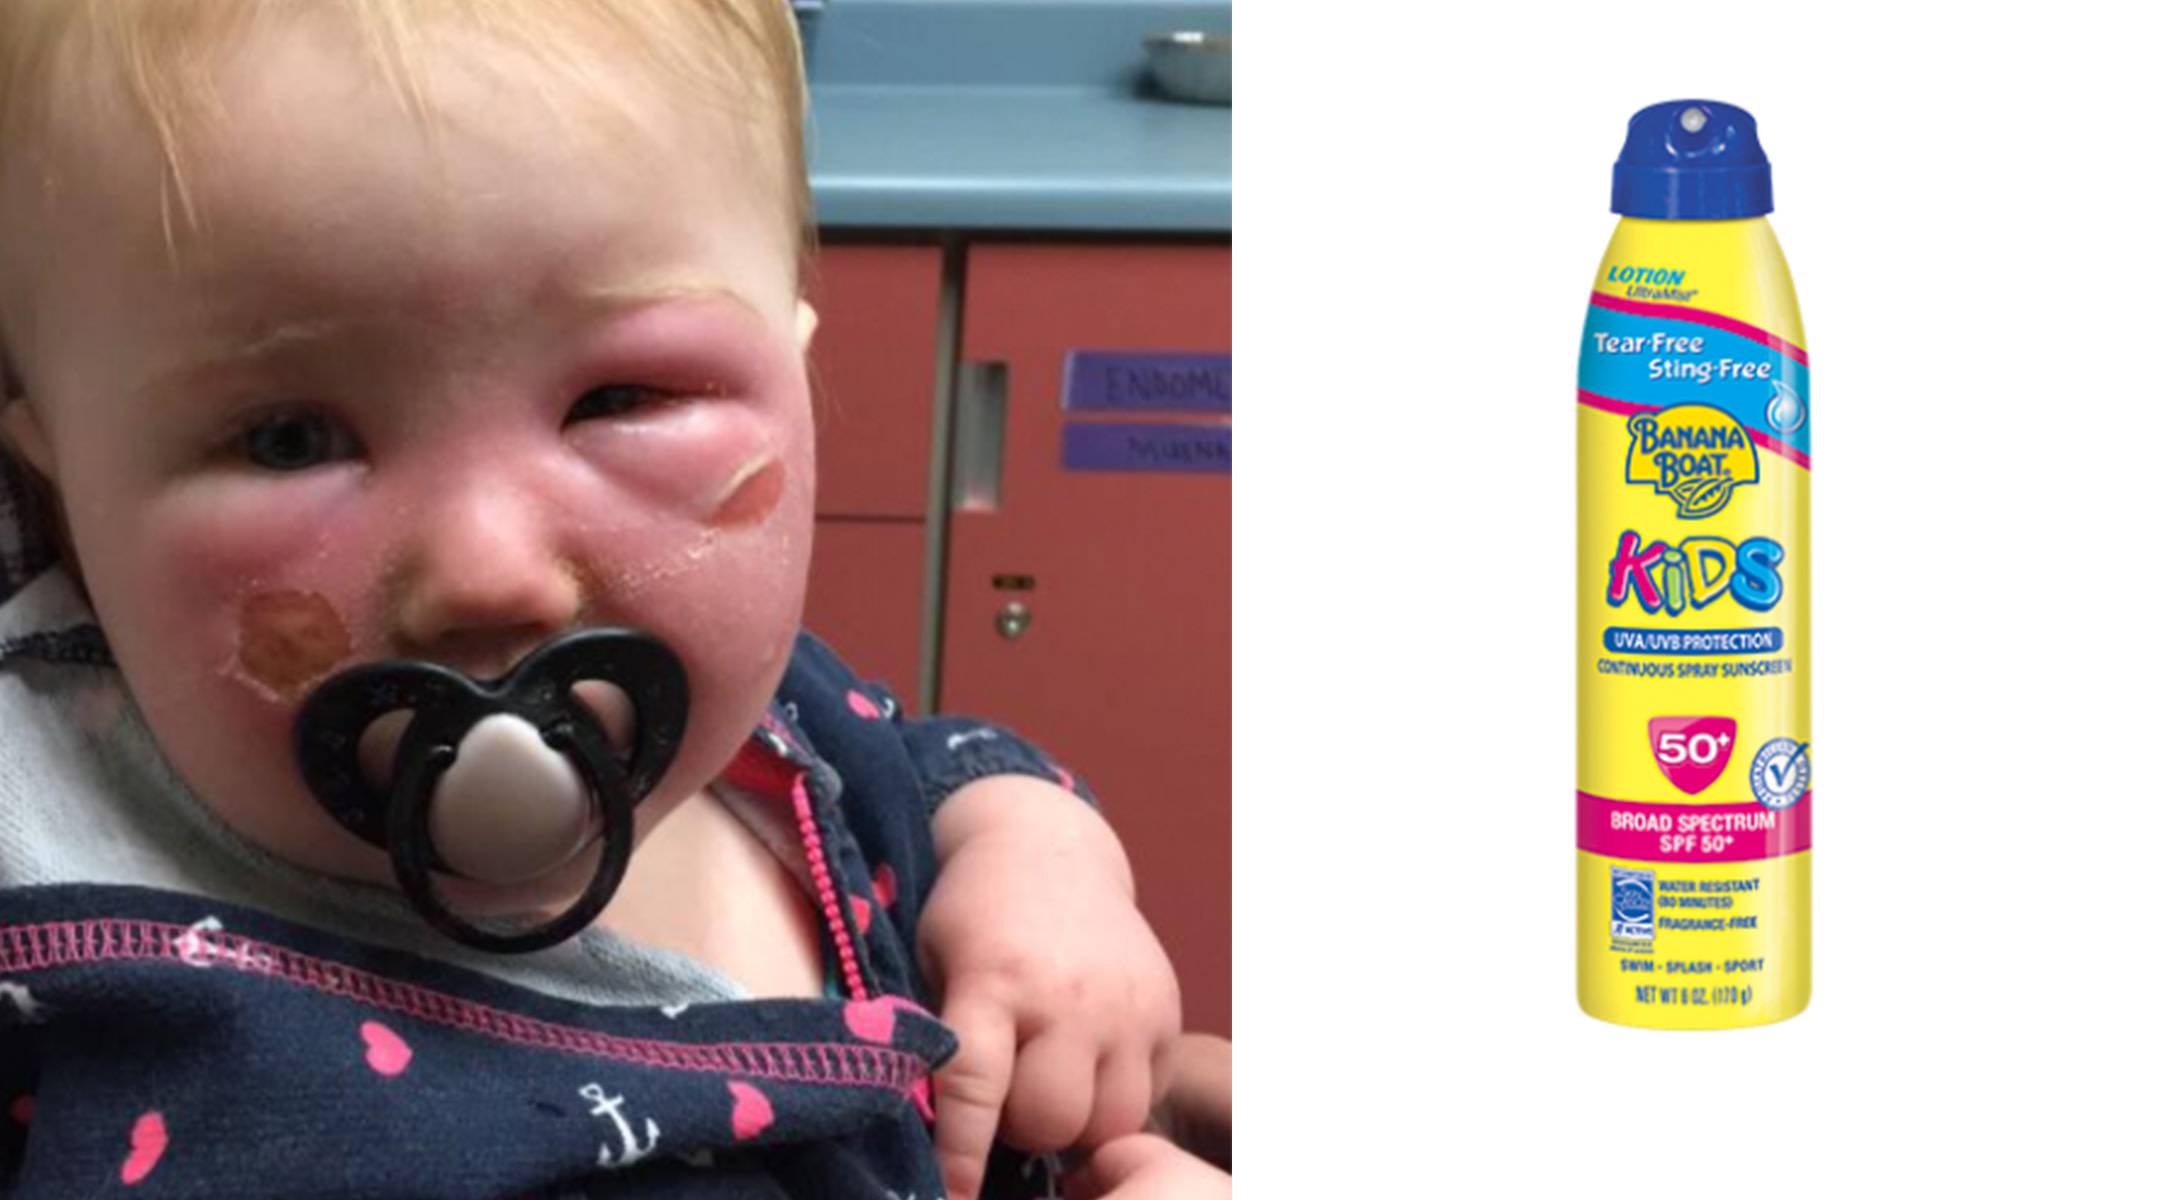 Baby with severe burns on face from sunscreen